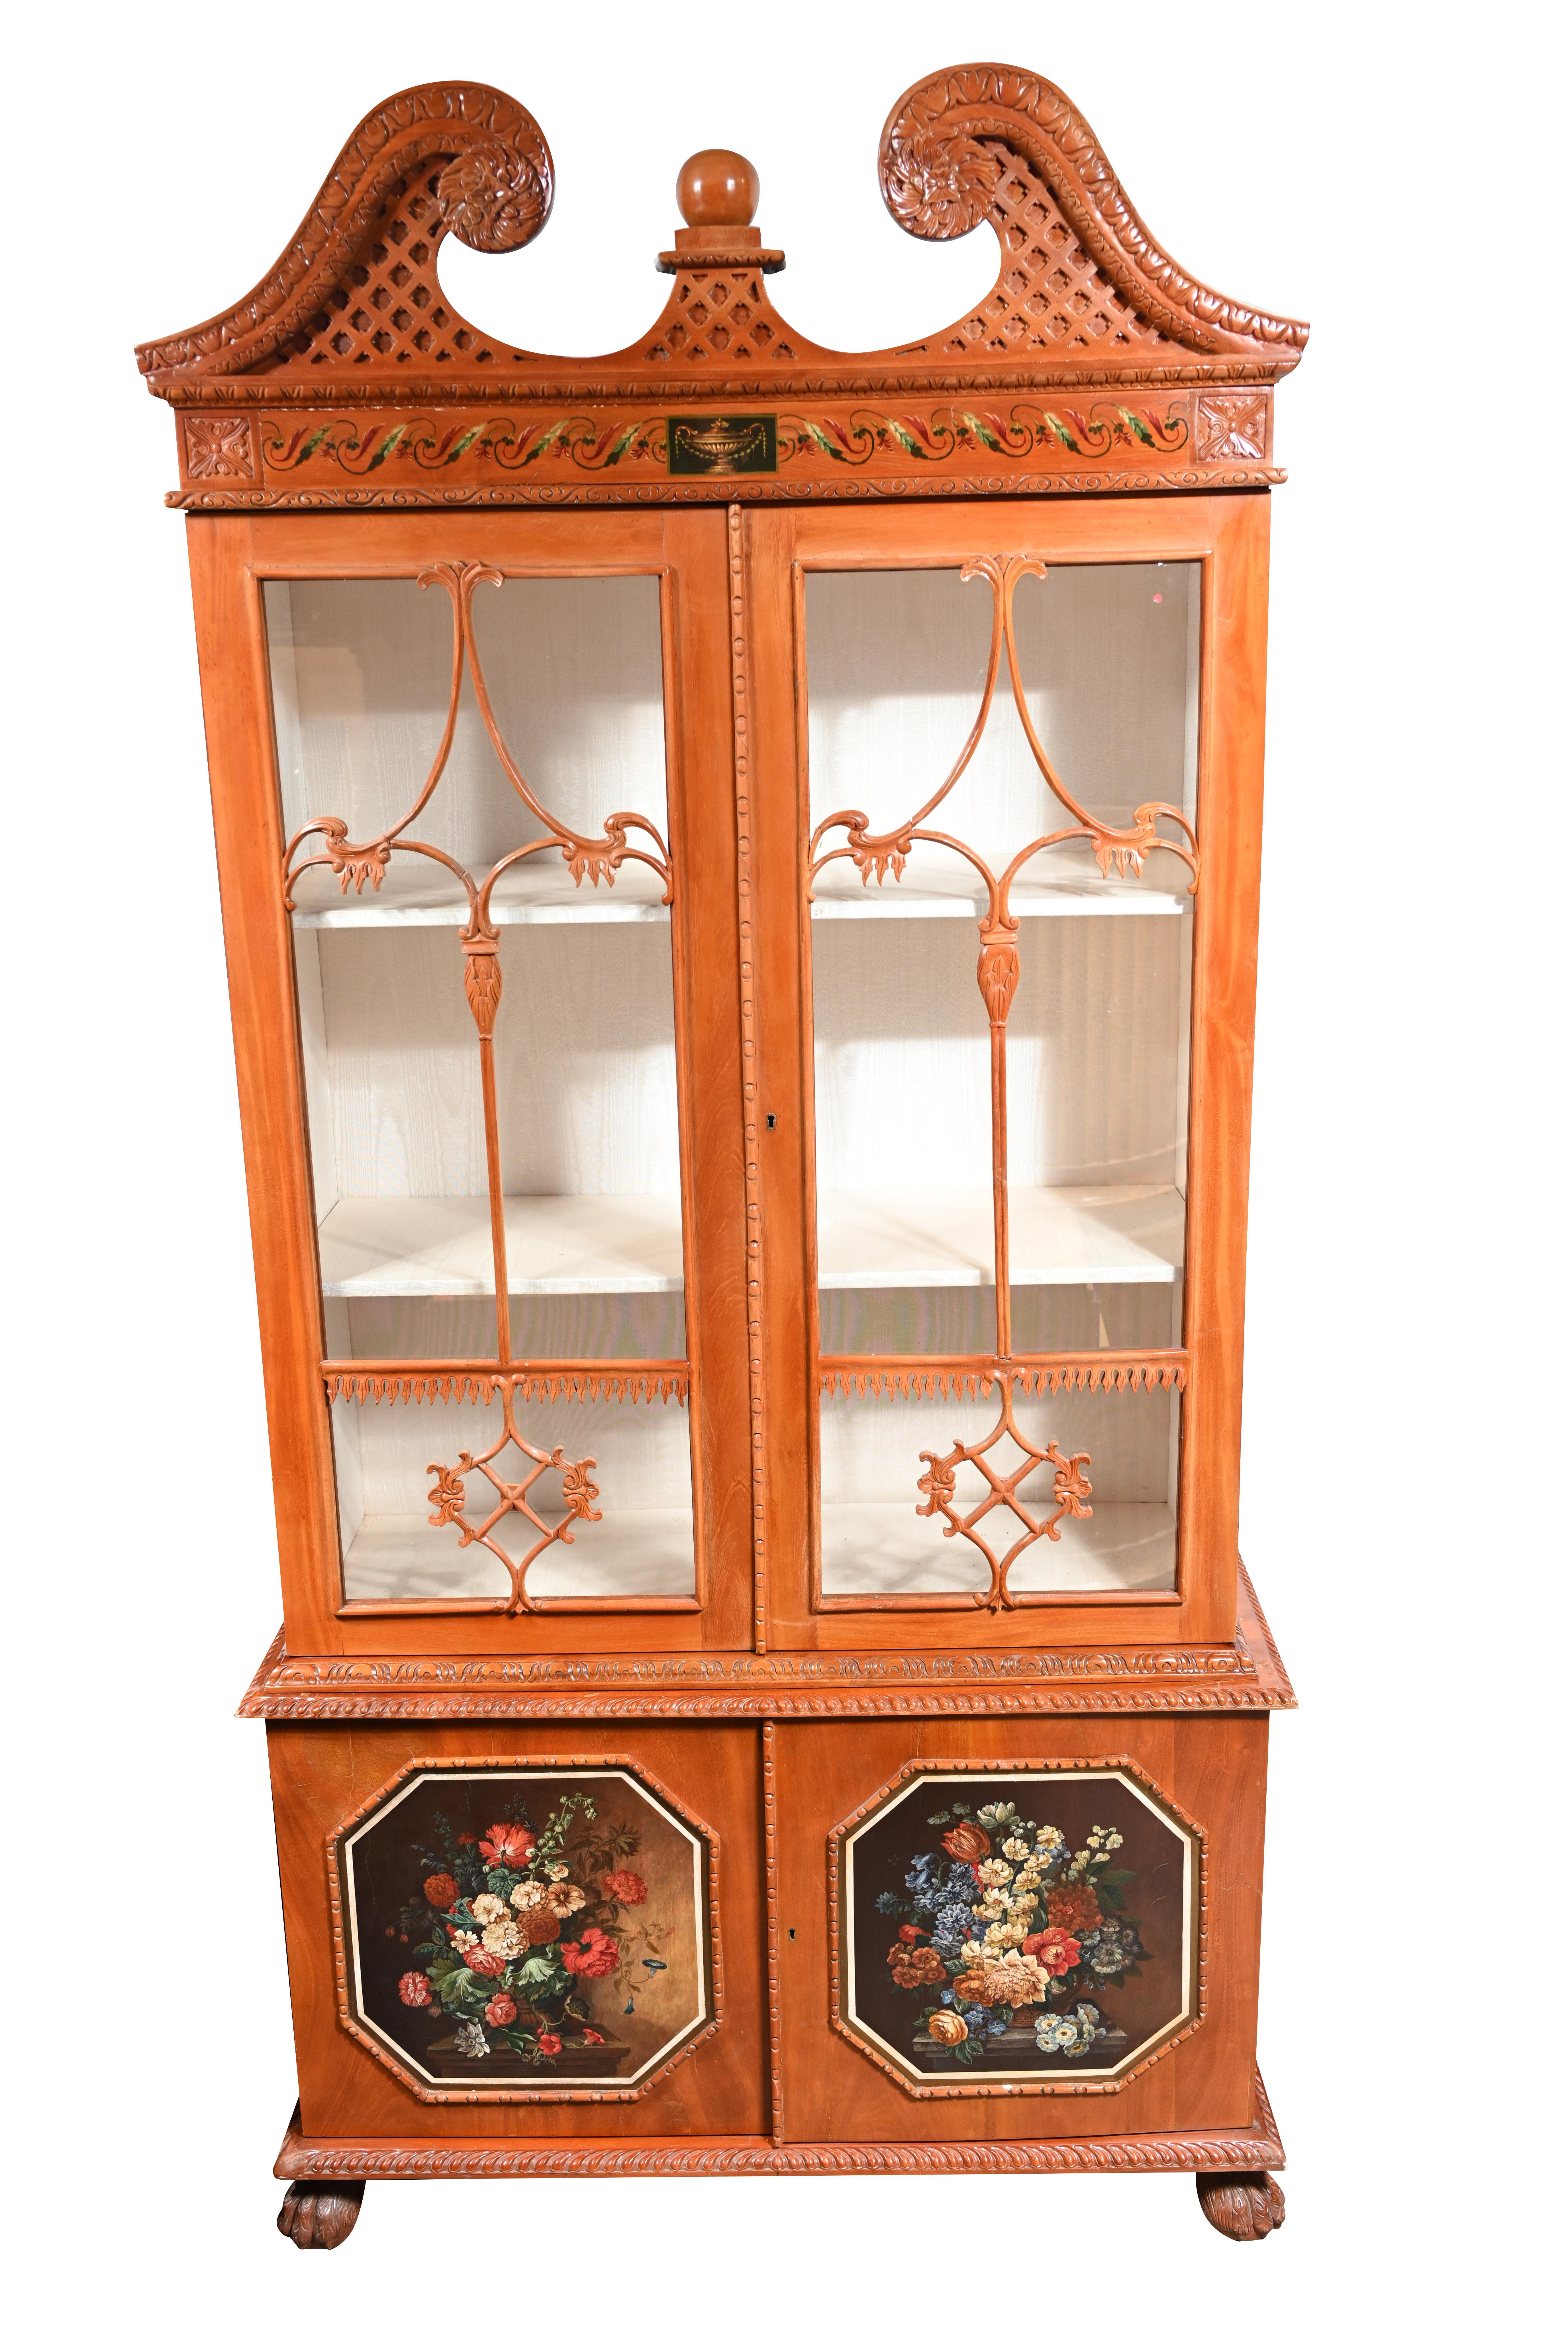 Important and unsual pair of Chippendale style glass fronted display cabinets or bookcases
Stunning pair and antique we date to circa 1920s
Large pair at over 8 feet tall - 2.5 metres
Love the intricately carved broken arch pediment to the